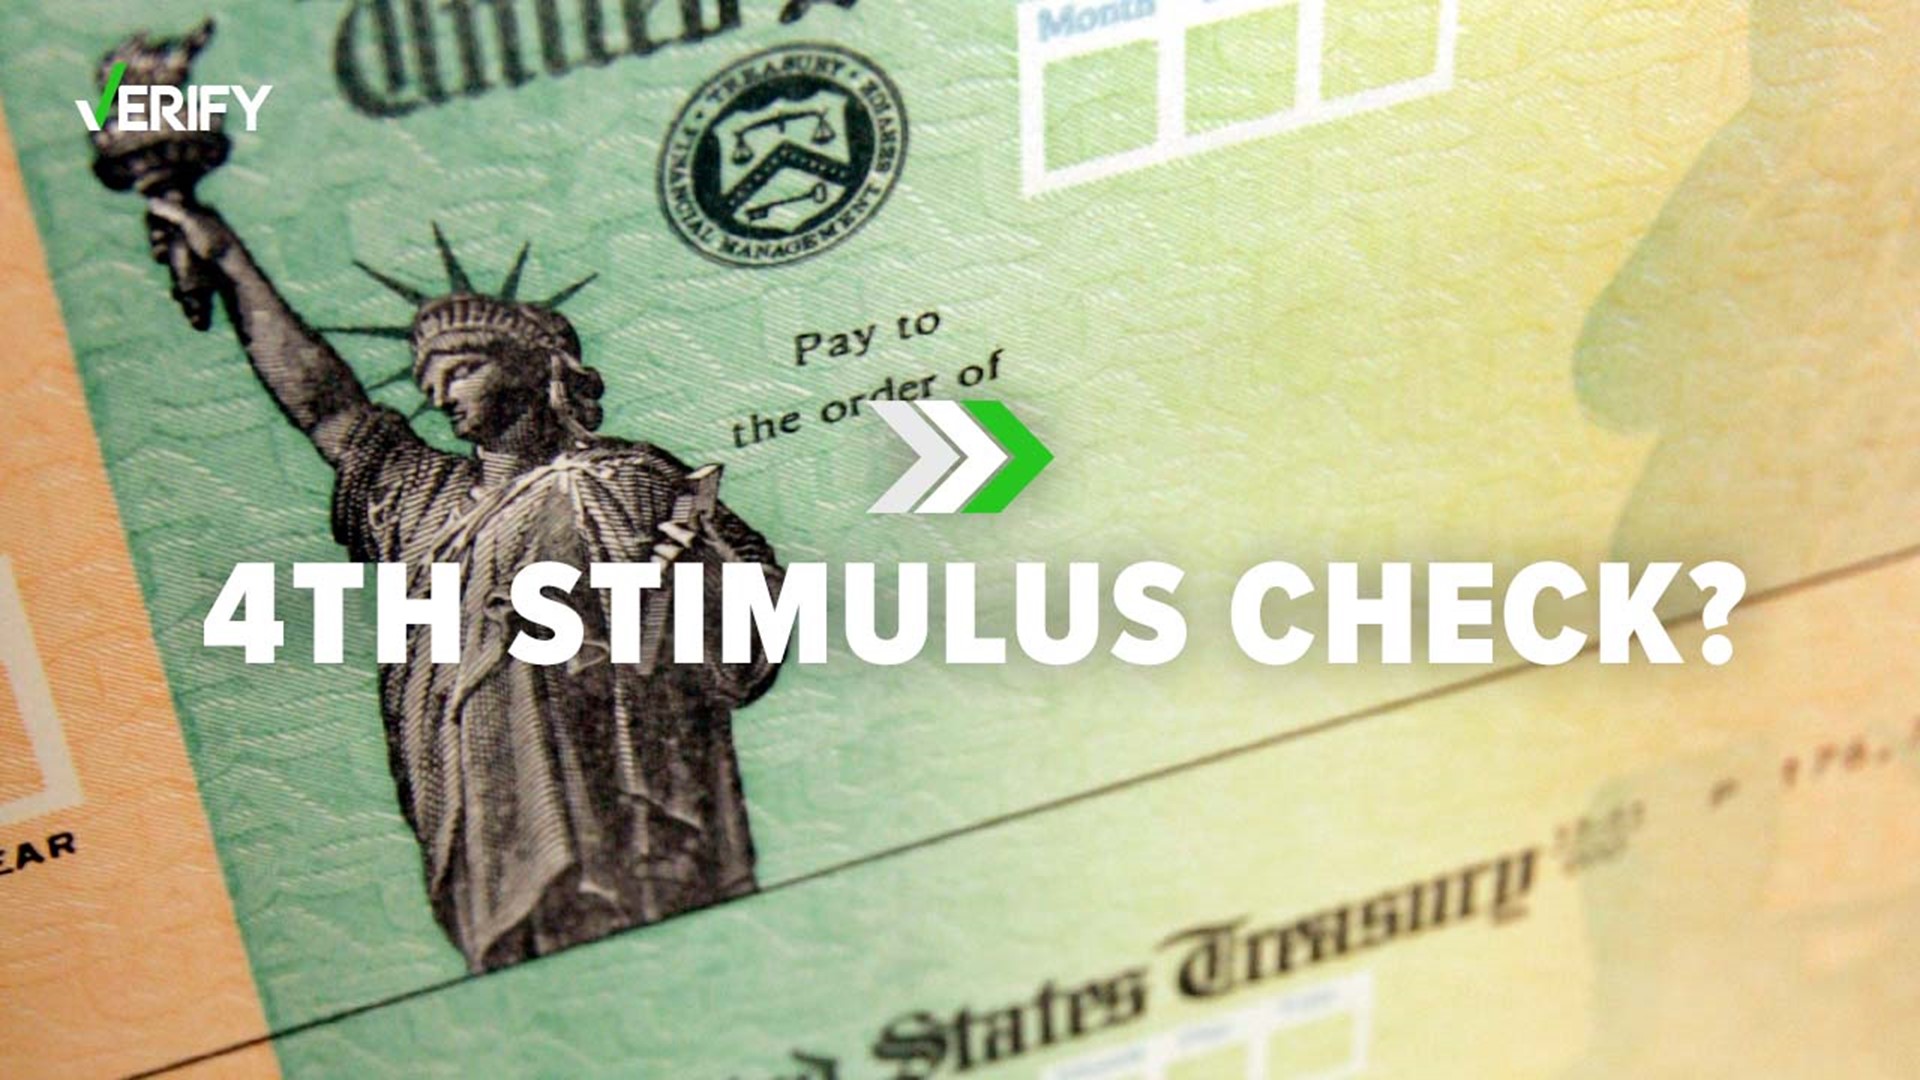 Despite claims made in YouTube videos about a fourth stimulus check being passed, Congress has taken no such action.